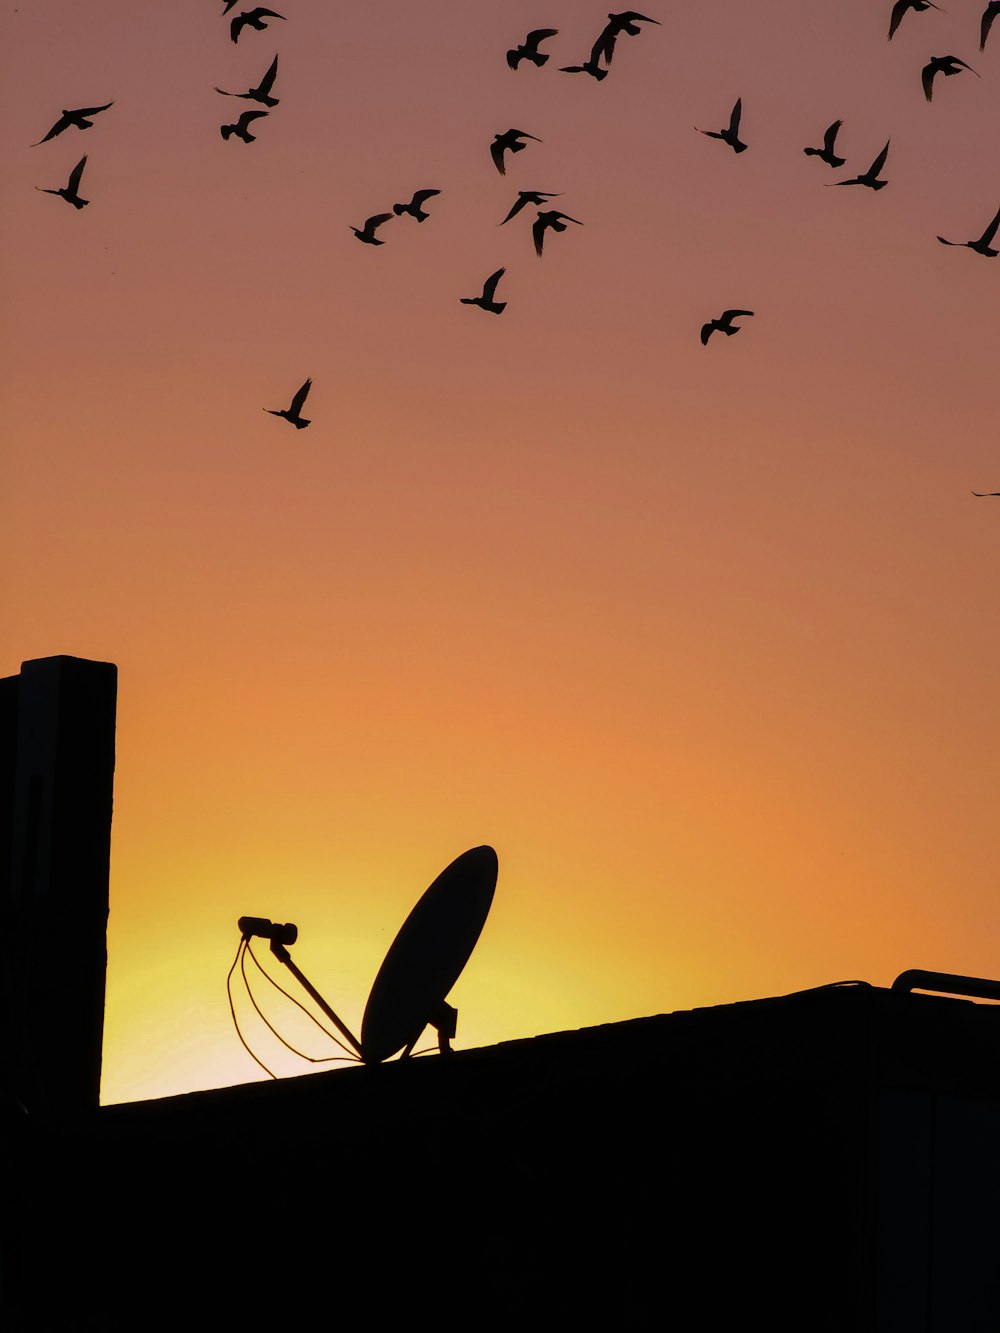 a silhouette of a person with a fishing pole and birds flying in the sky